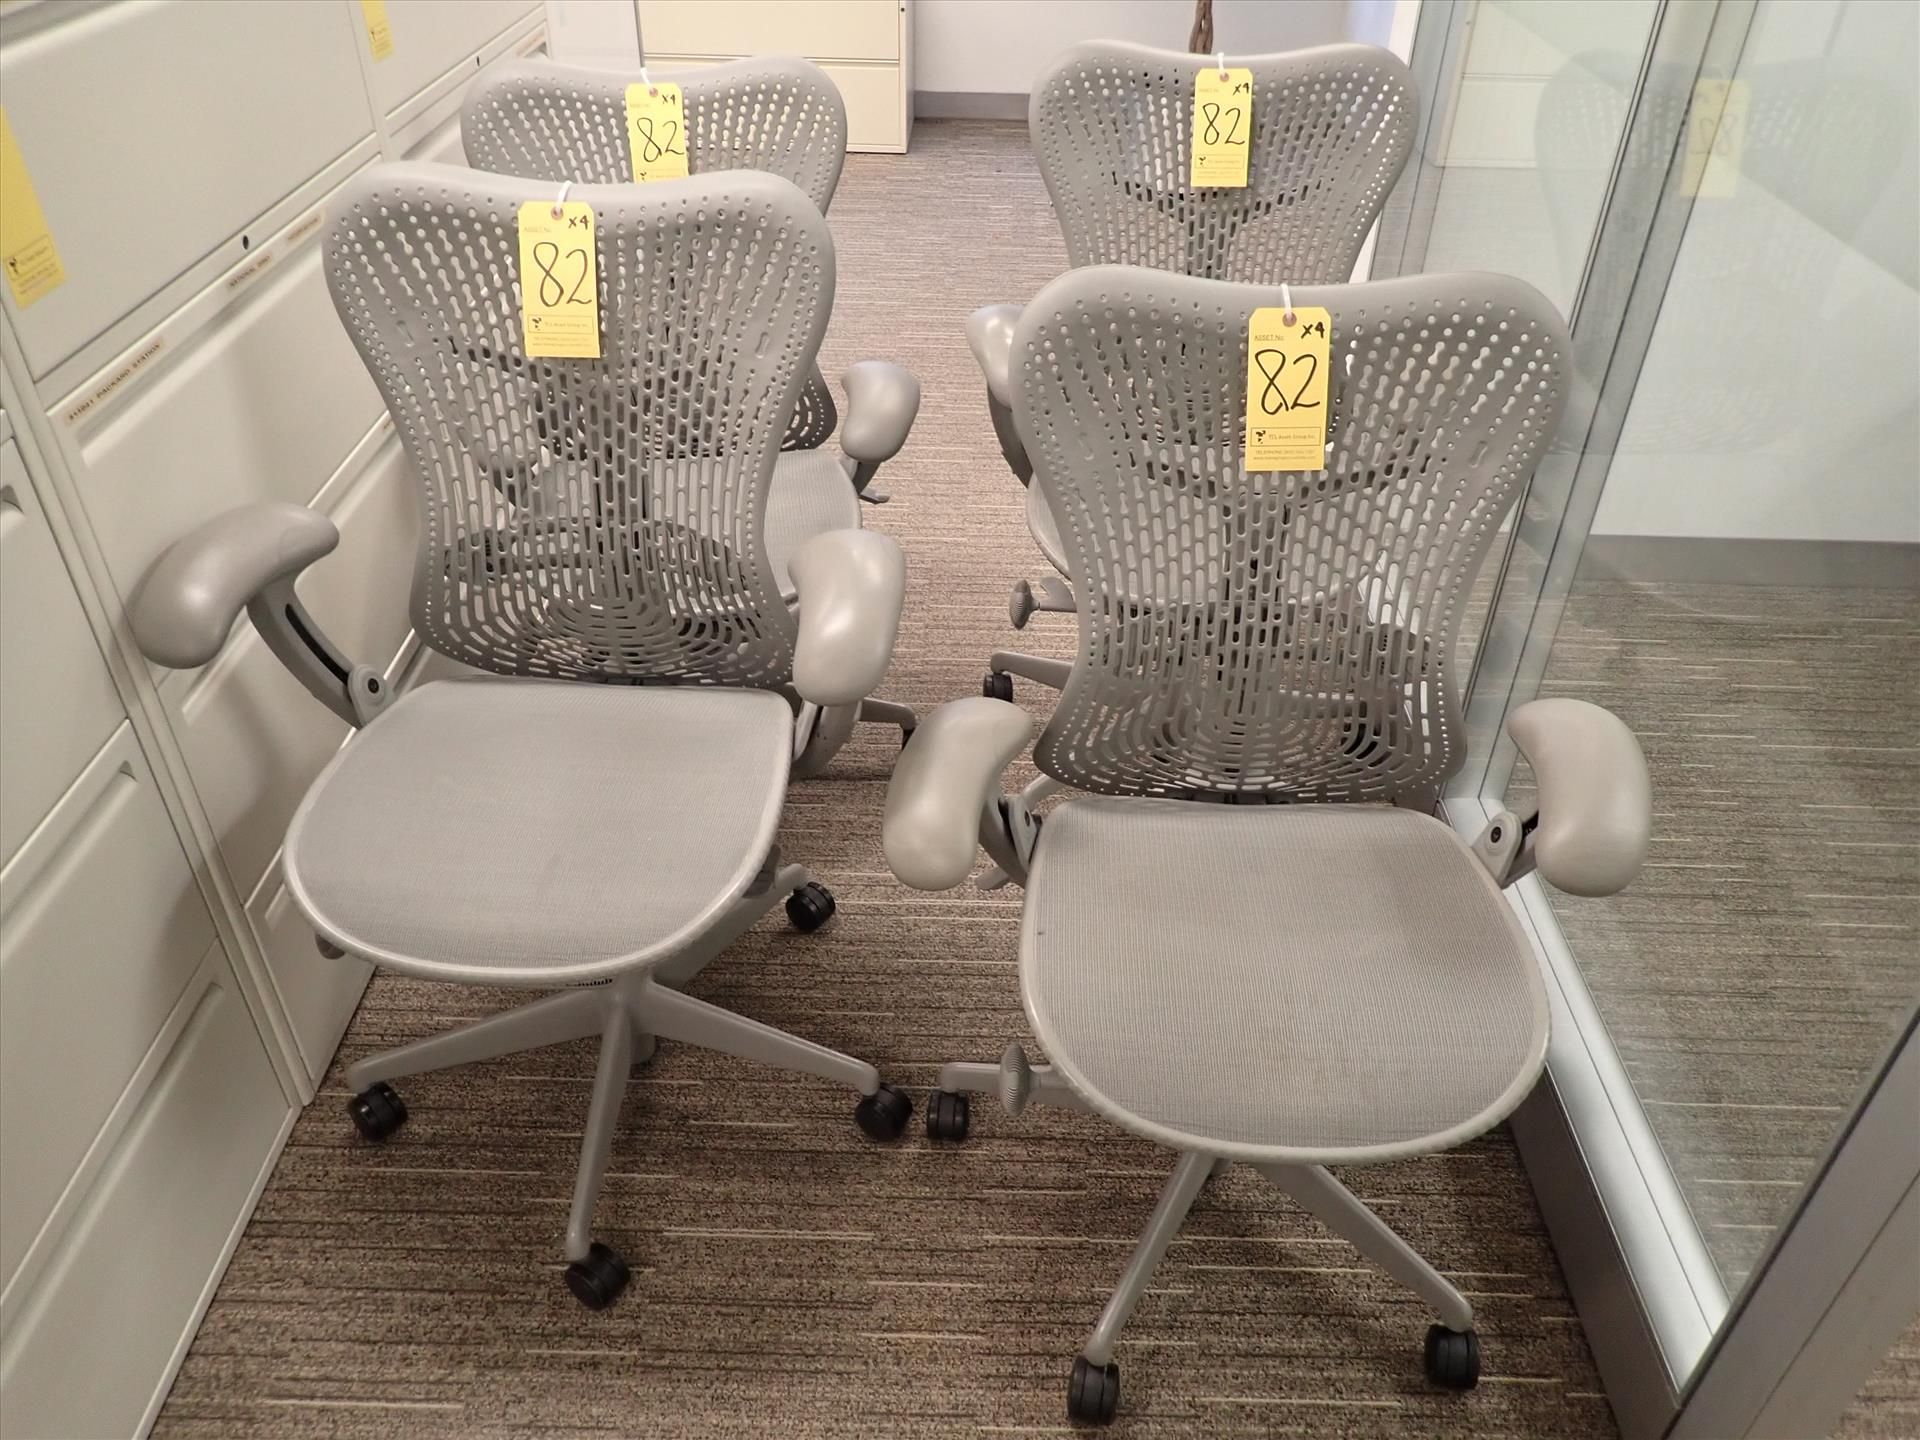 Herman Miller Mirra task chairs; adjustable height, arms, lumbar support, tilt seat and back,